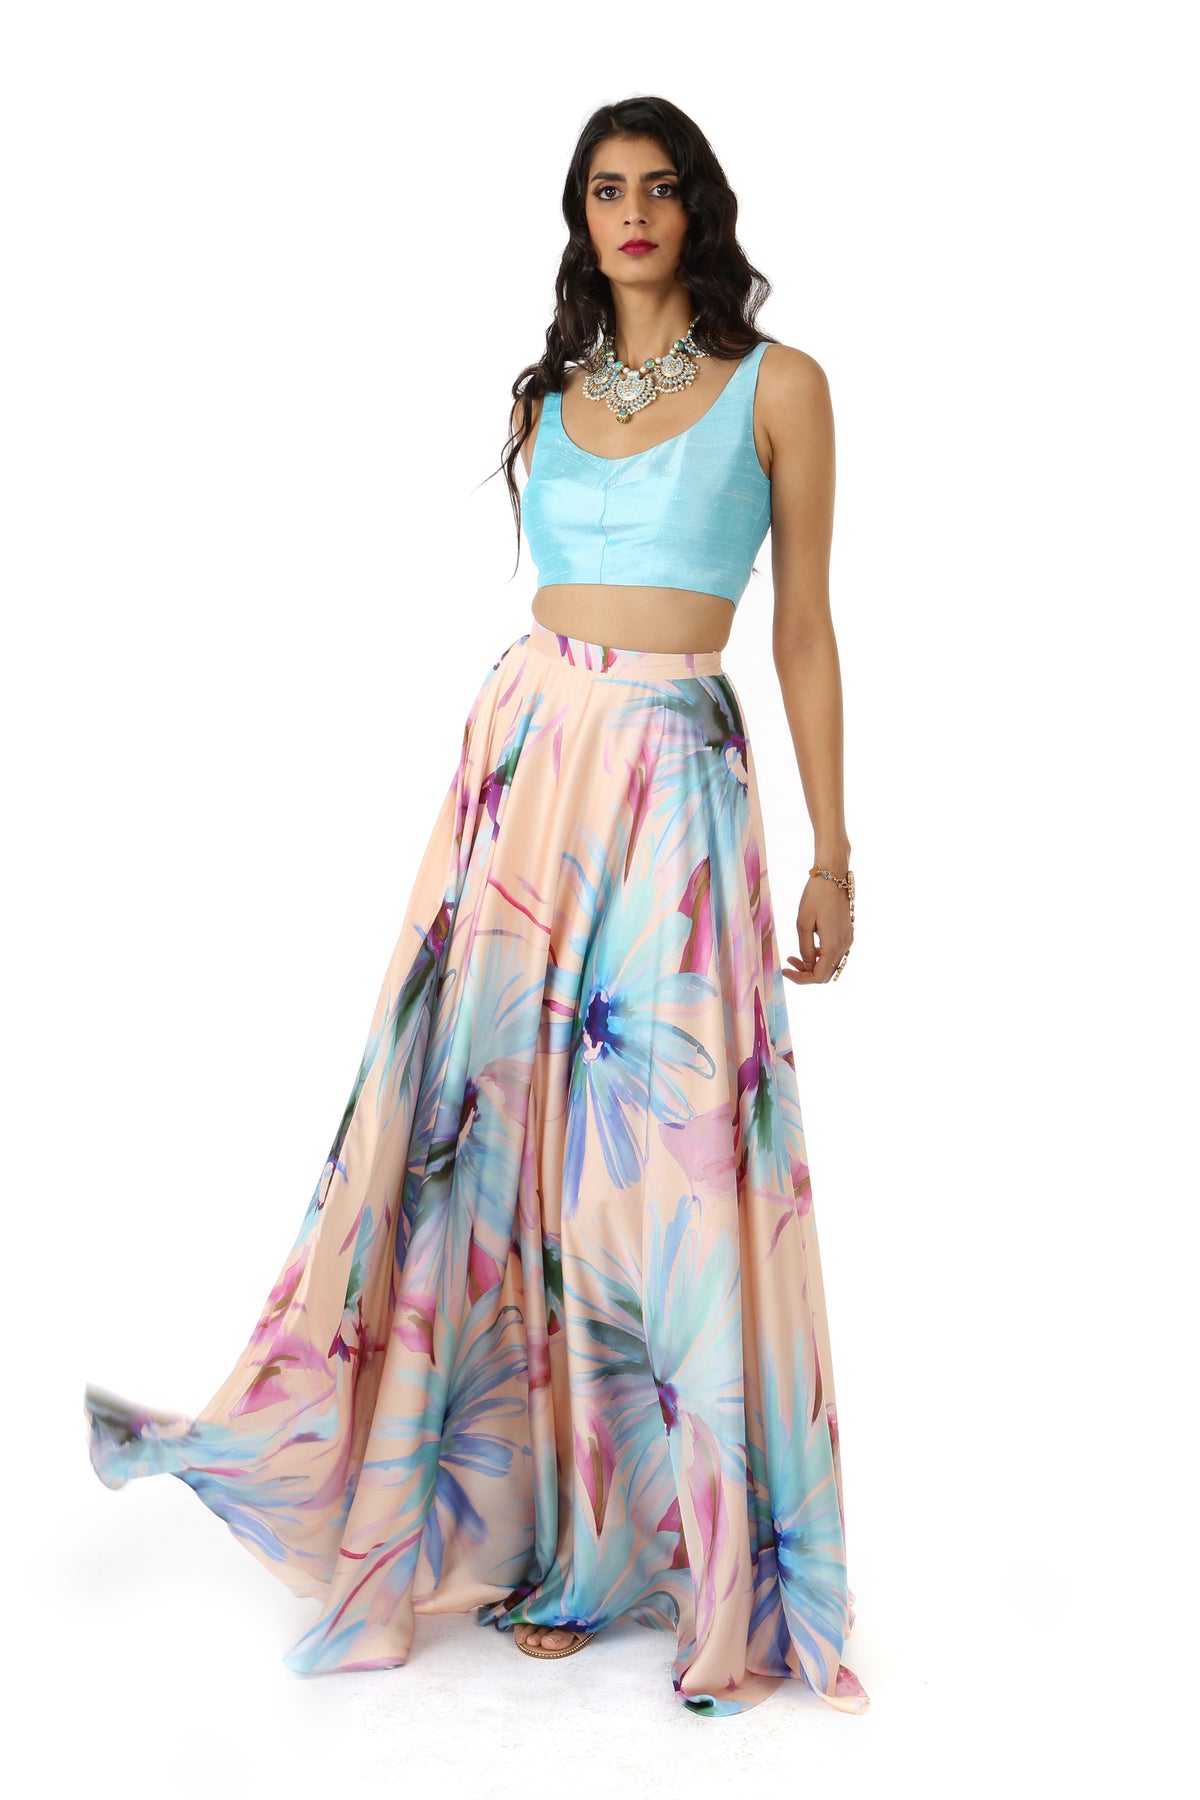 ANISHA Floral Satin Maxi Skirt with Aqua Watercolor Flowers Printed Throughout Skirt - Front View | HARLEEN KAUR